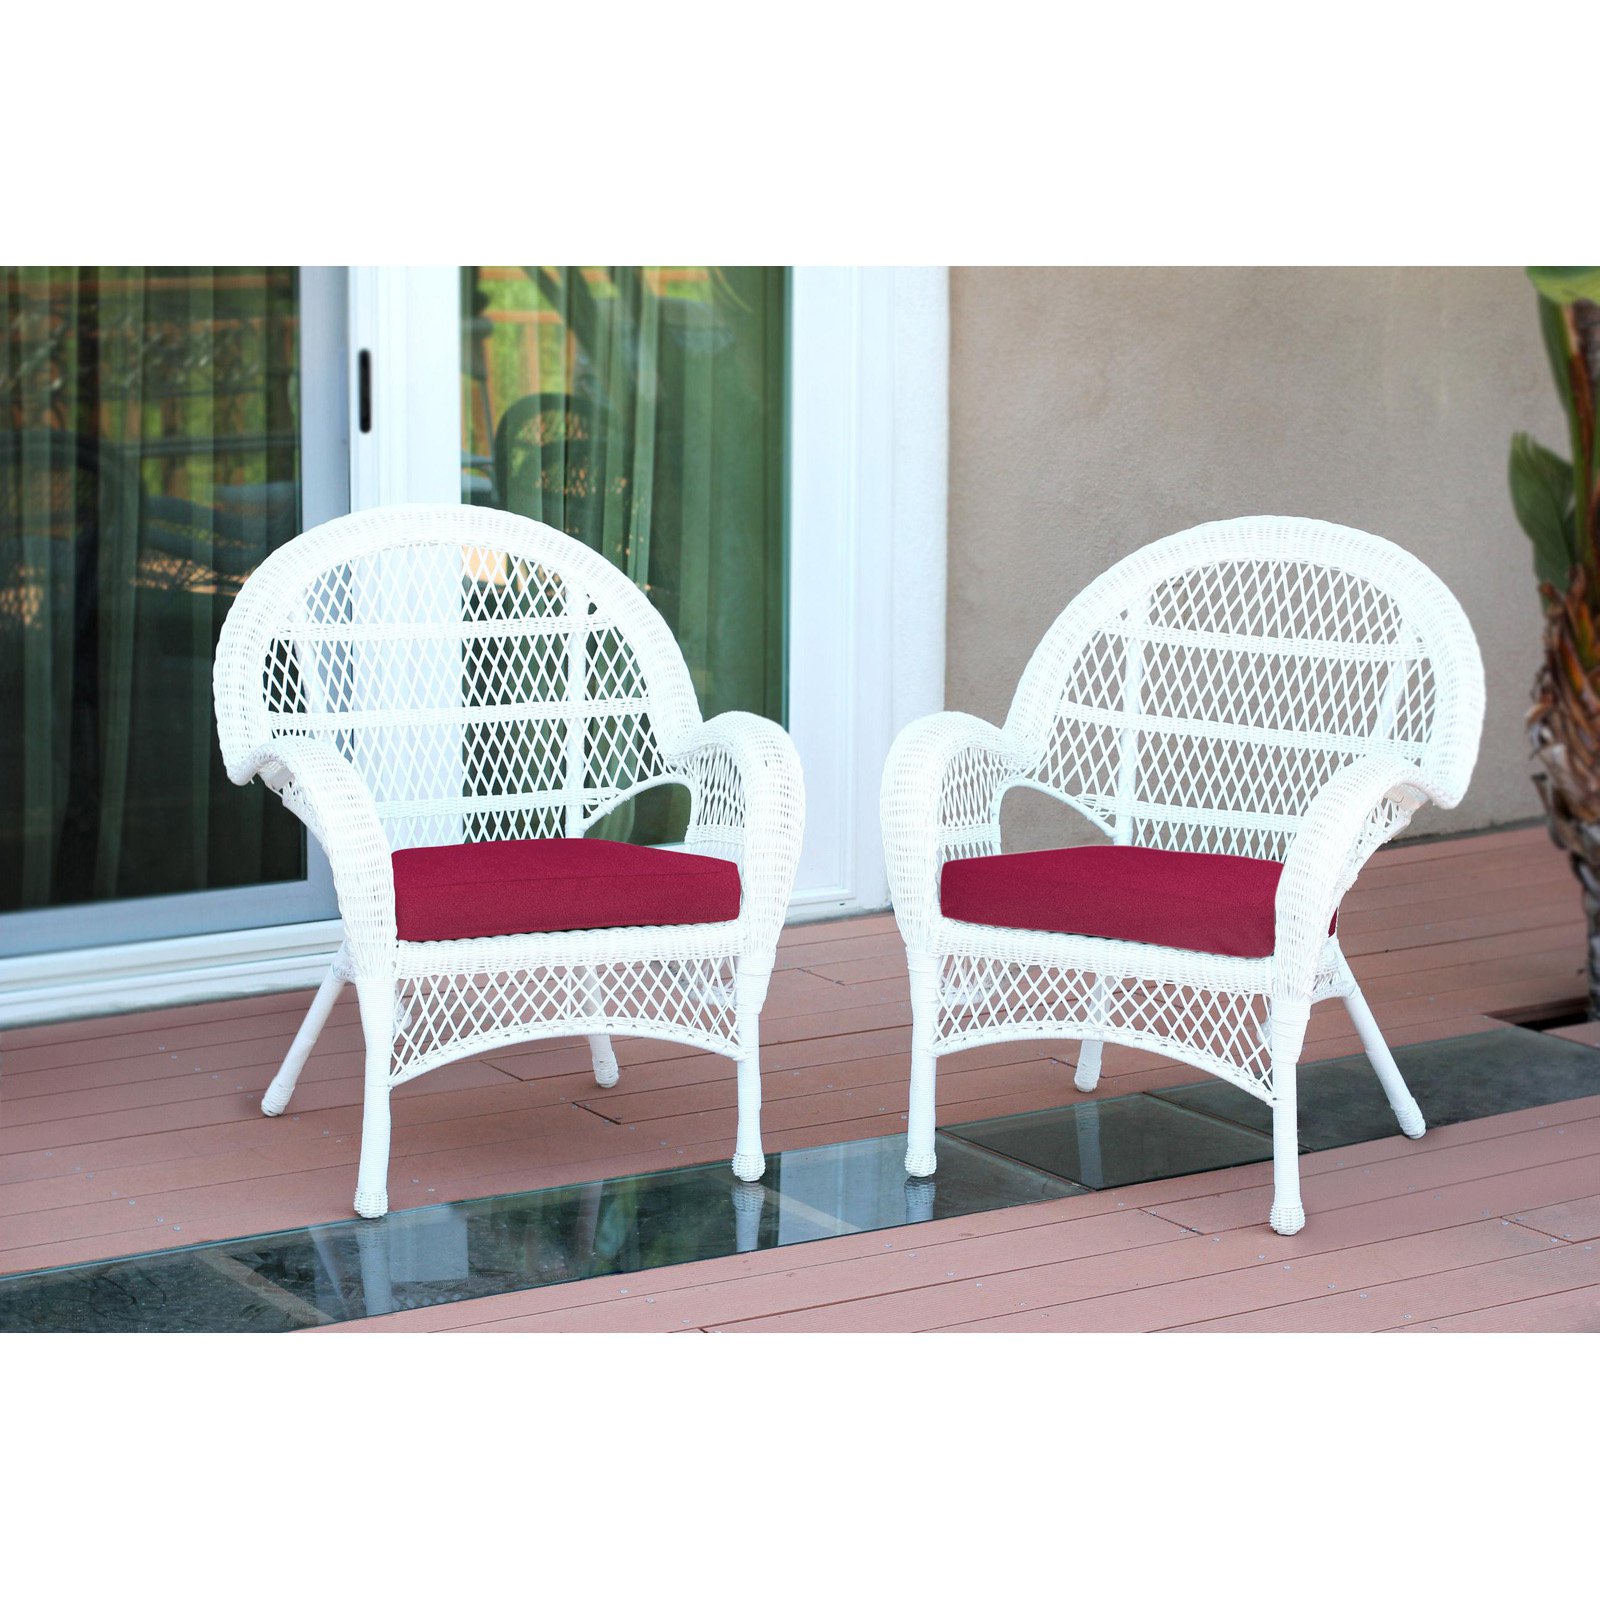 Jeco Santa Maria Wicker Patio Chairs with Optional Cushion - Set of 2 - image 1 of 11